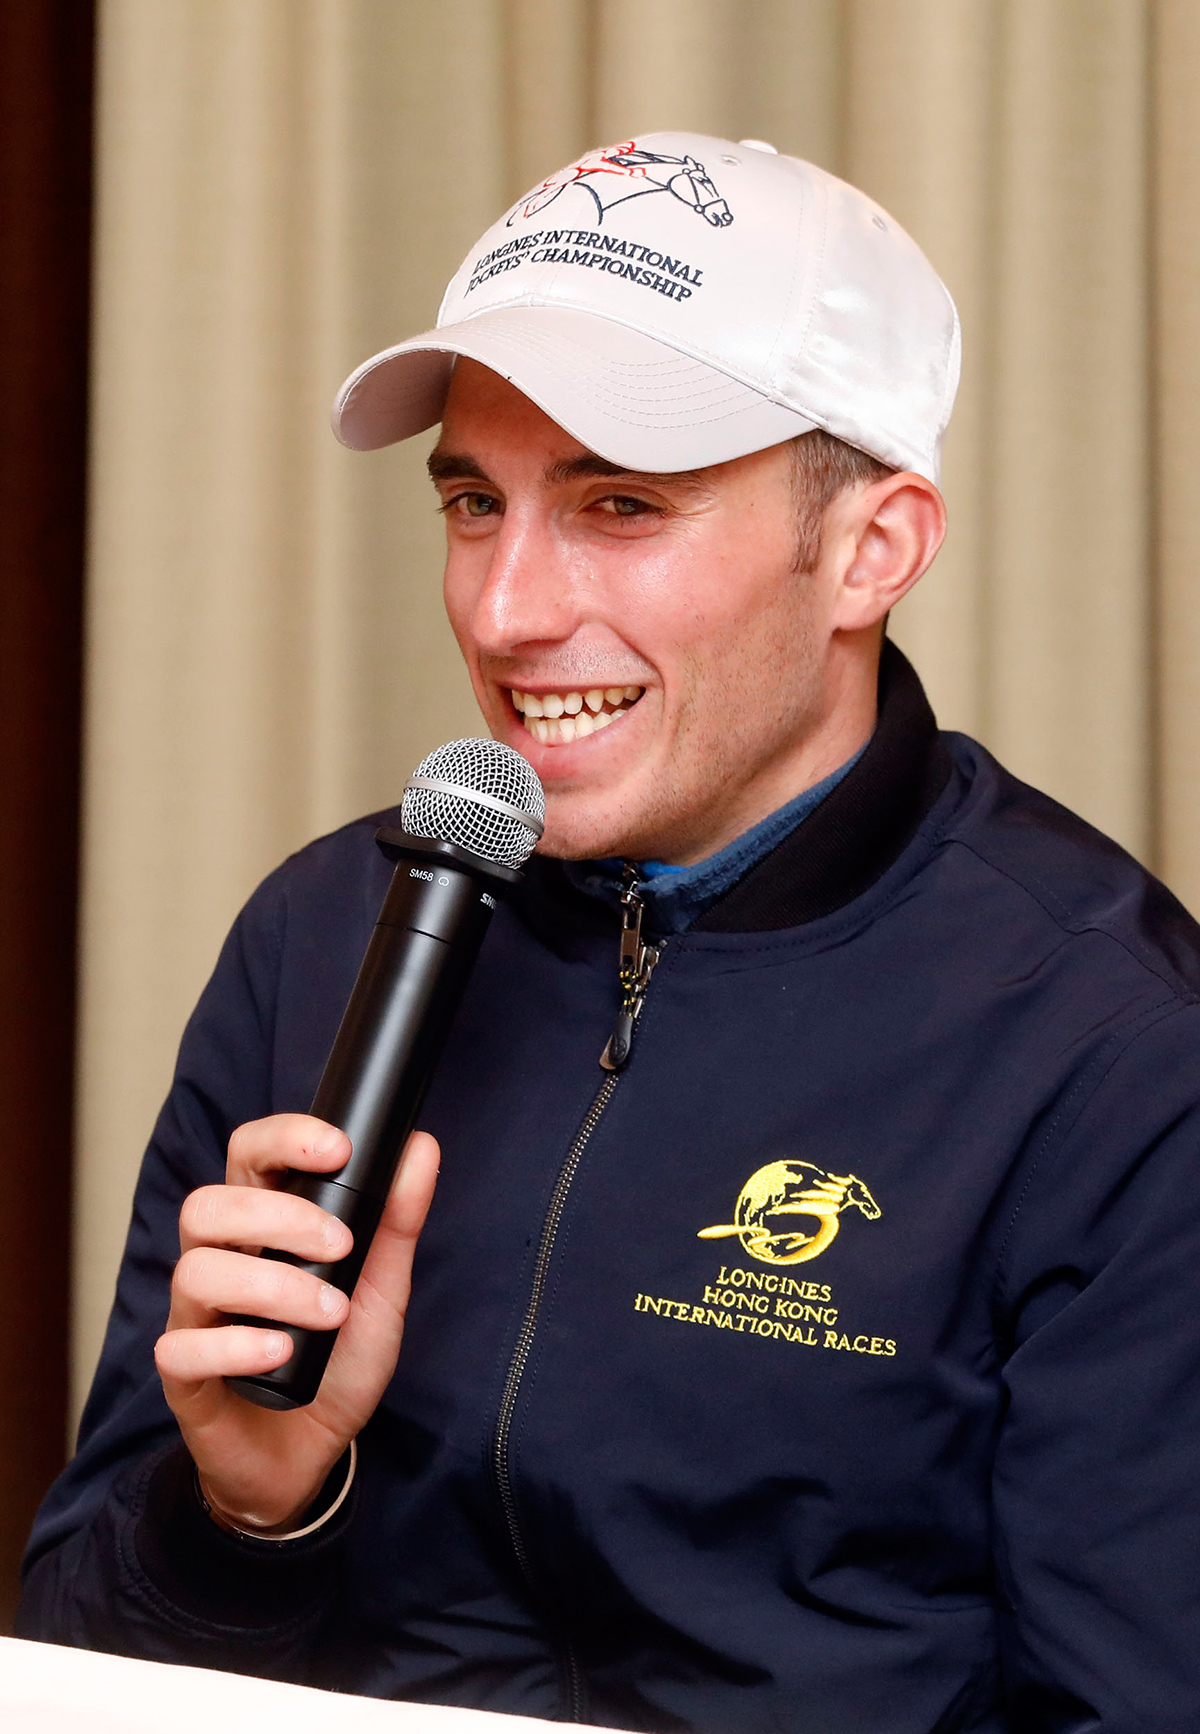 Club Jockey Pierre-Charles Boudot meets media representatives in a press session at Sha Tin Racecourse this morning and takes questions.